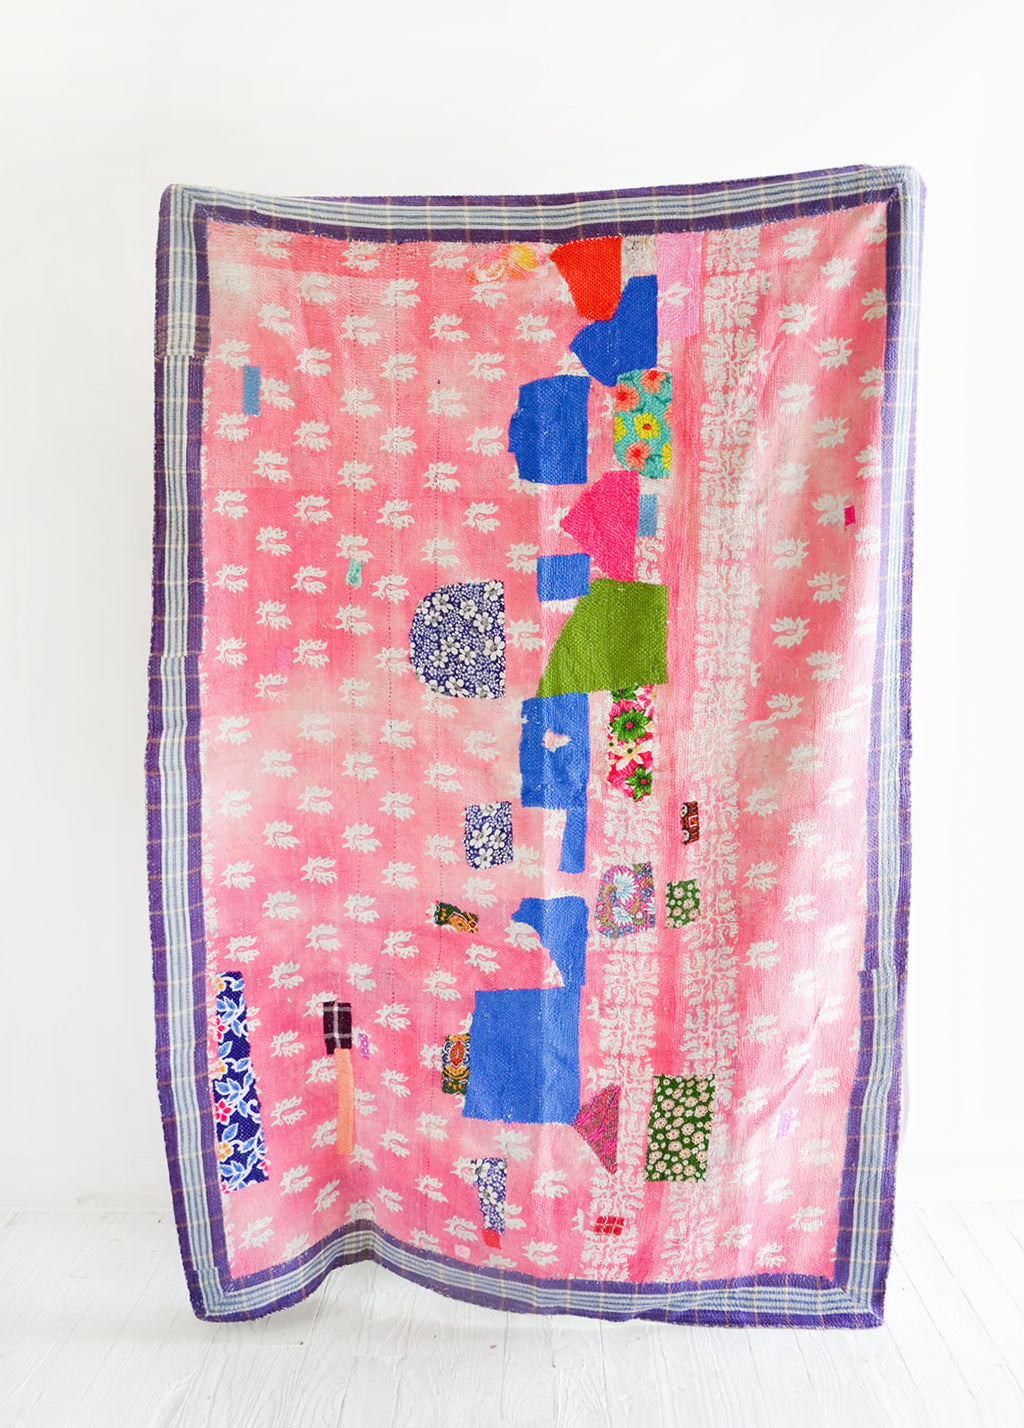 1: Vintage Patchwork Kantha Quilt in Pink Pattern with Blue Accents